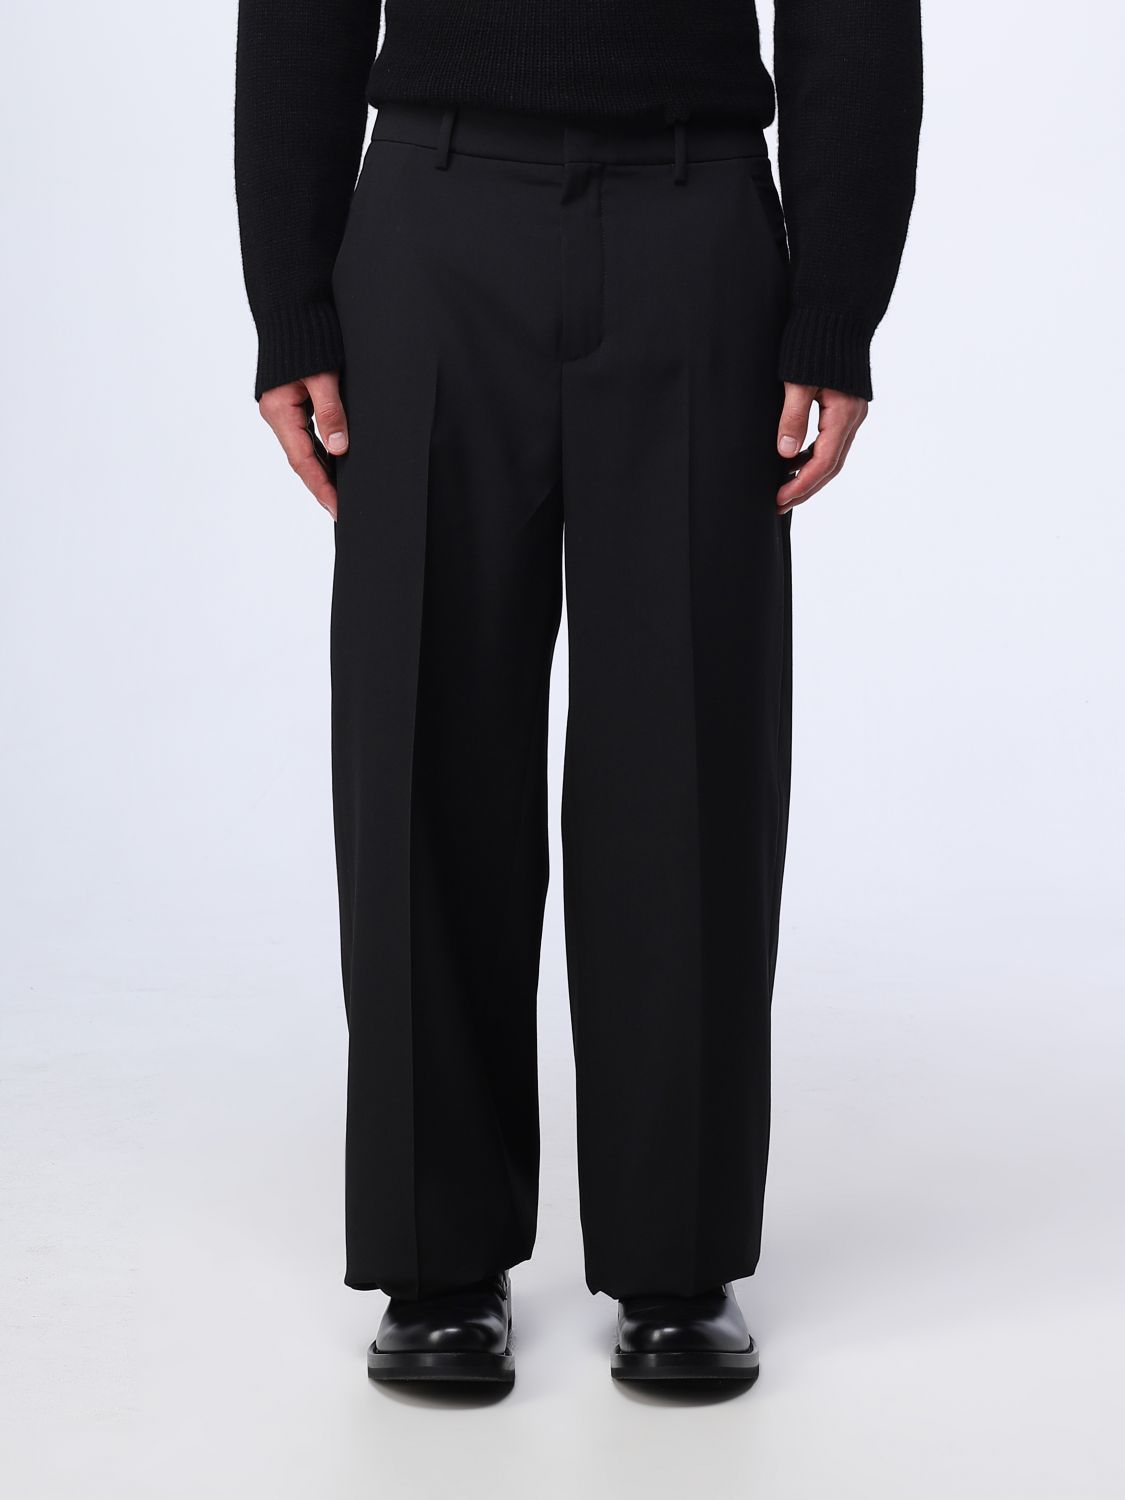 VALENTINO Formal Striped Tailored Trousers | Cruise Fashion